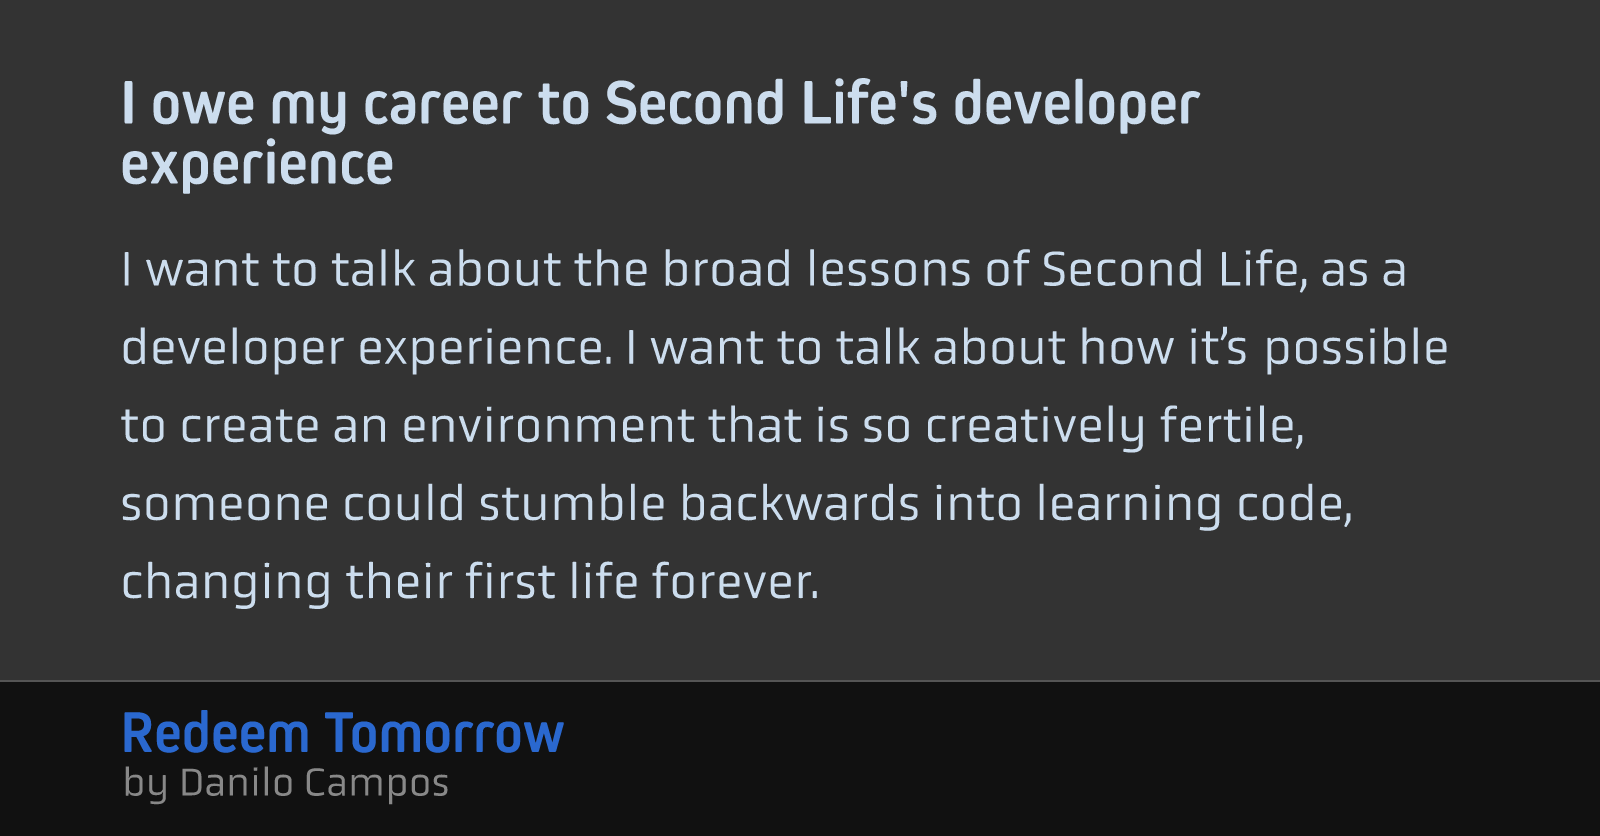 I owe my career to Second Life's developer experience